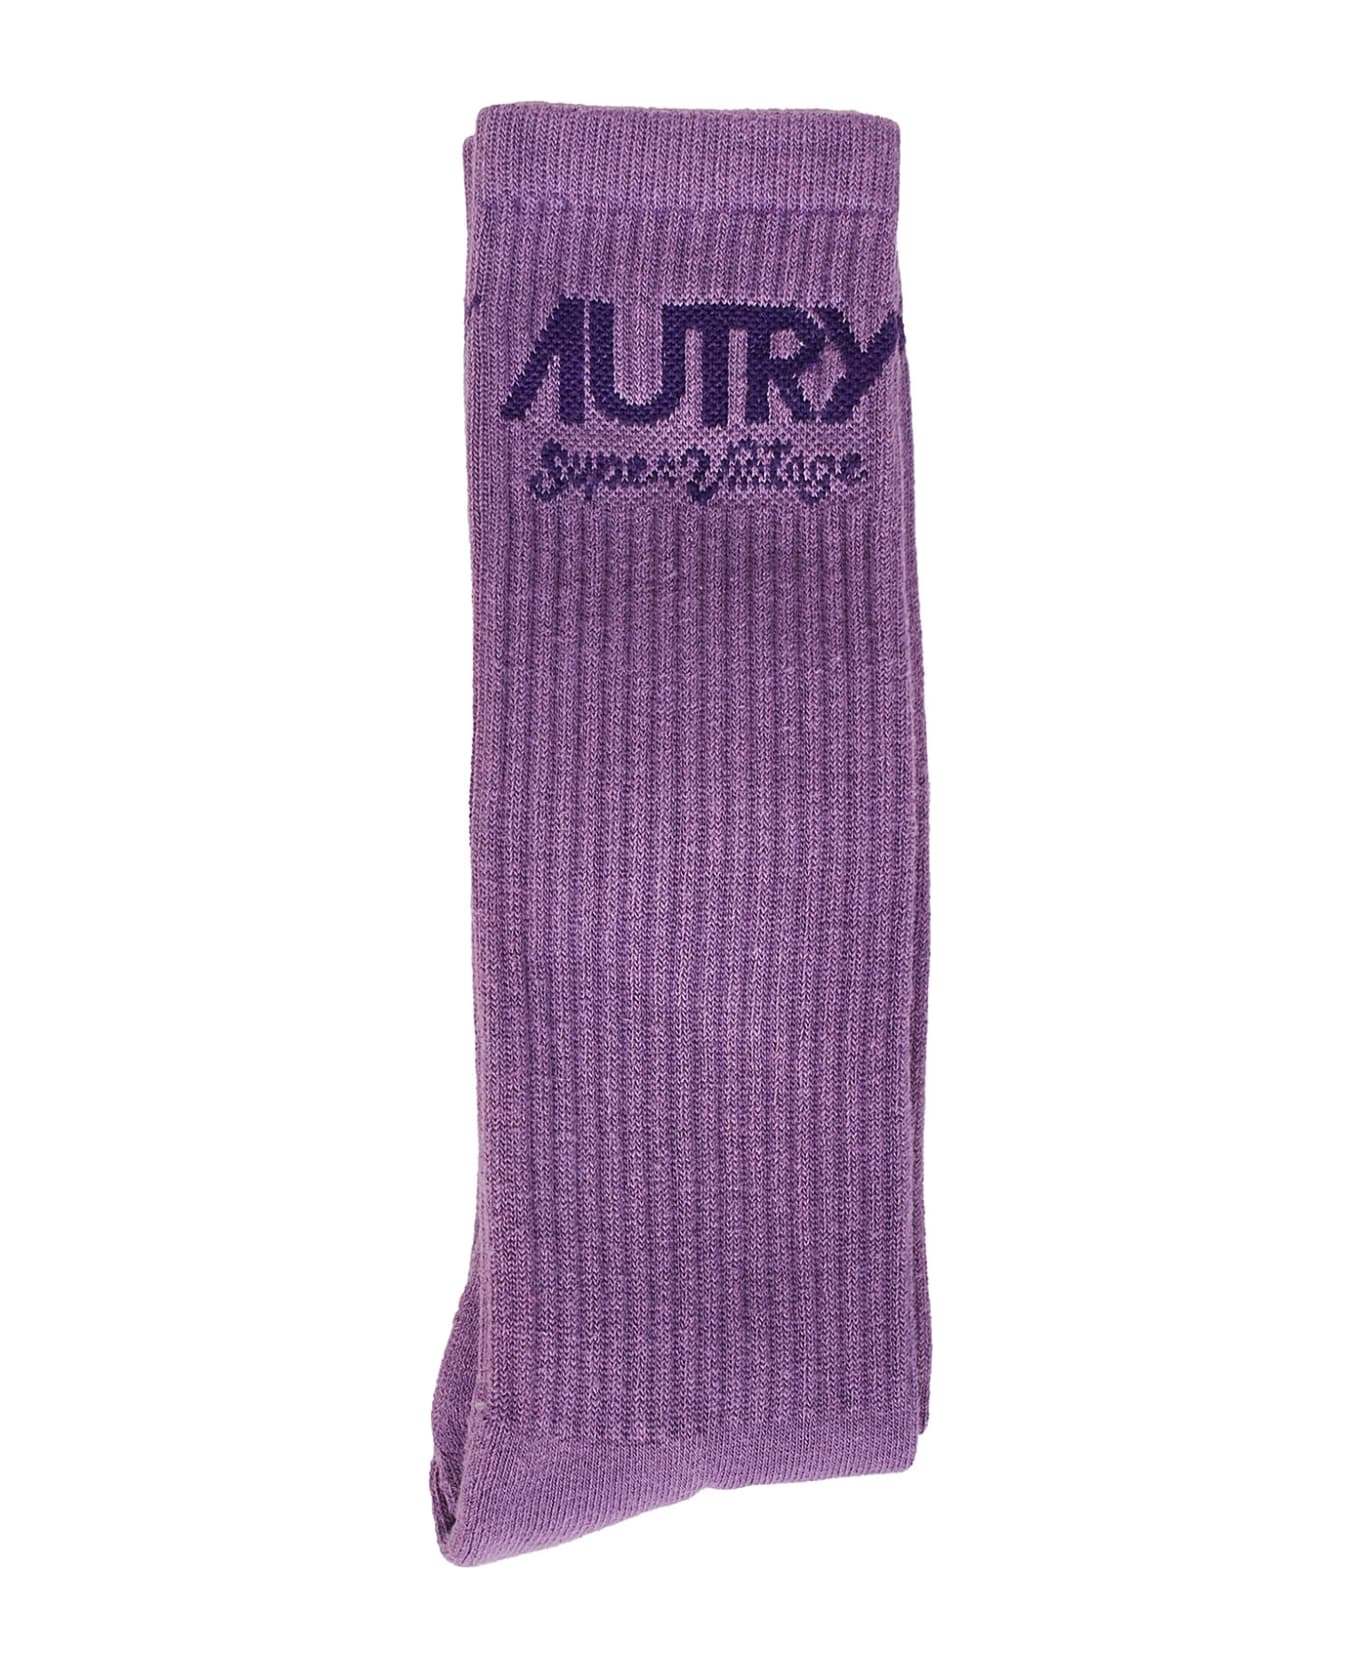 Autry Supervintage Socks - Tinto Lilac 靴下＆タイツ